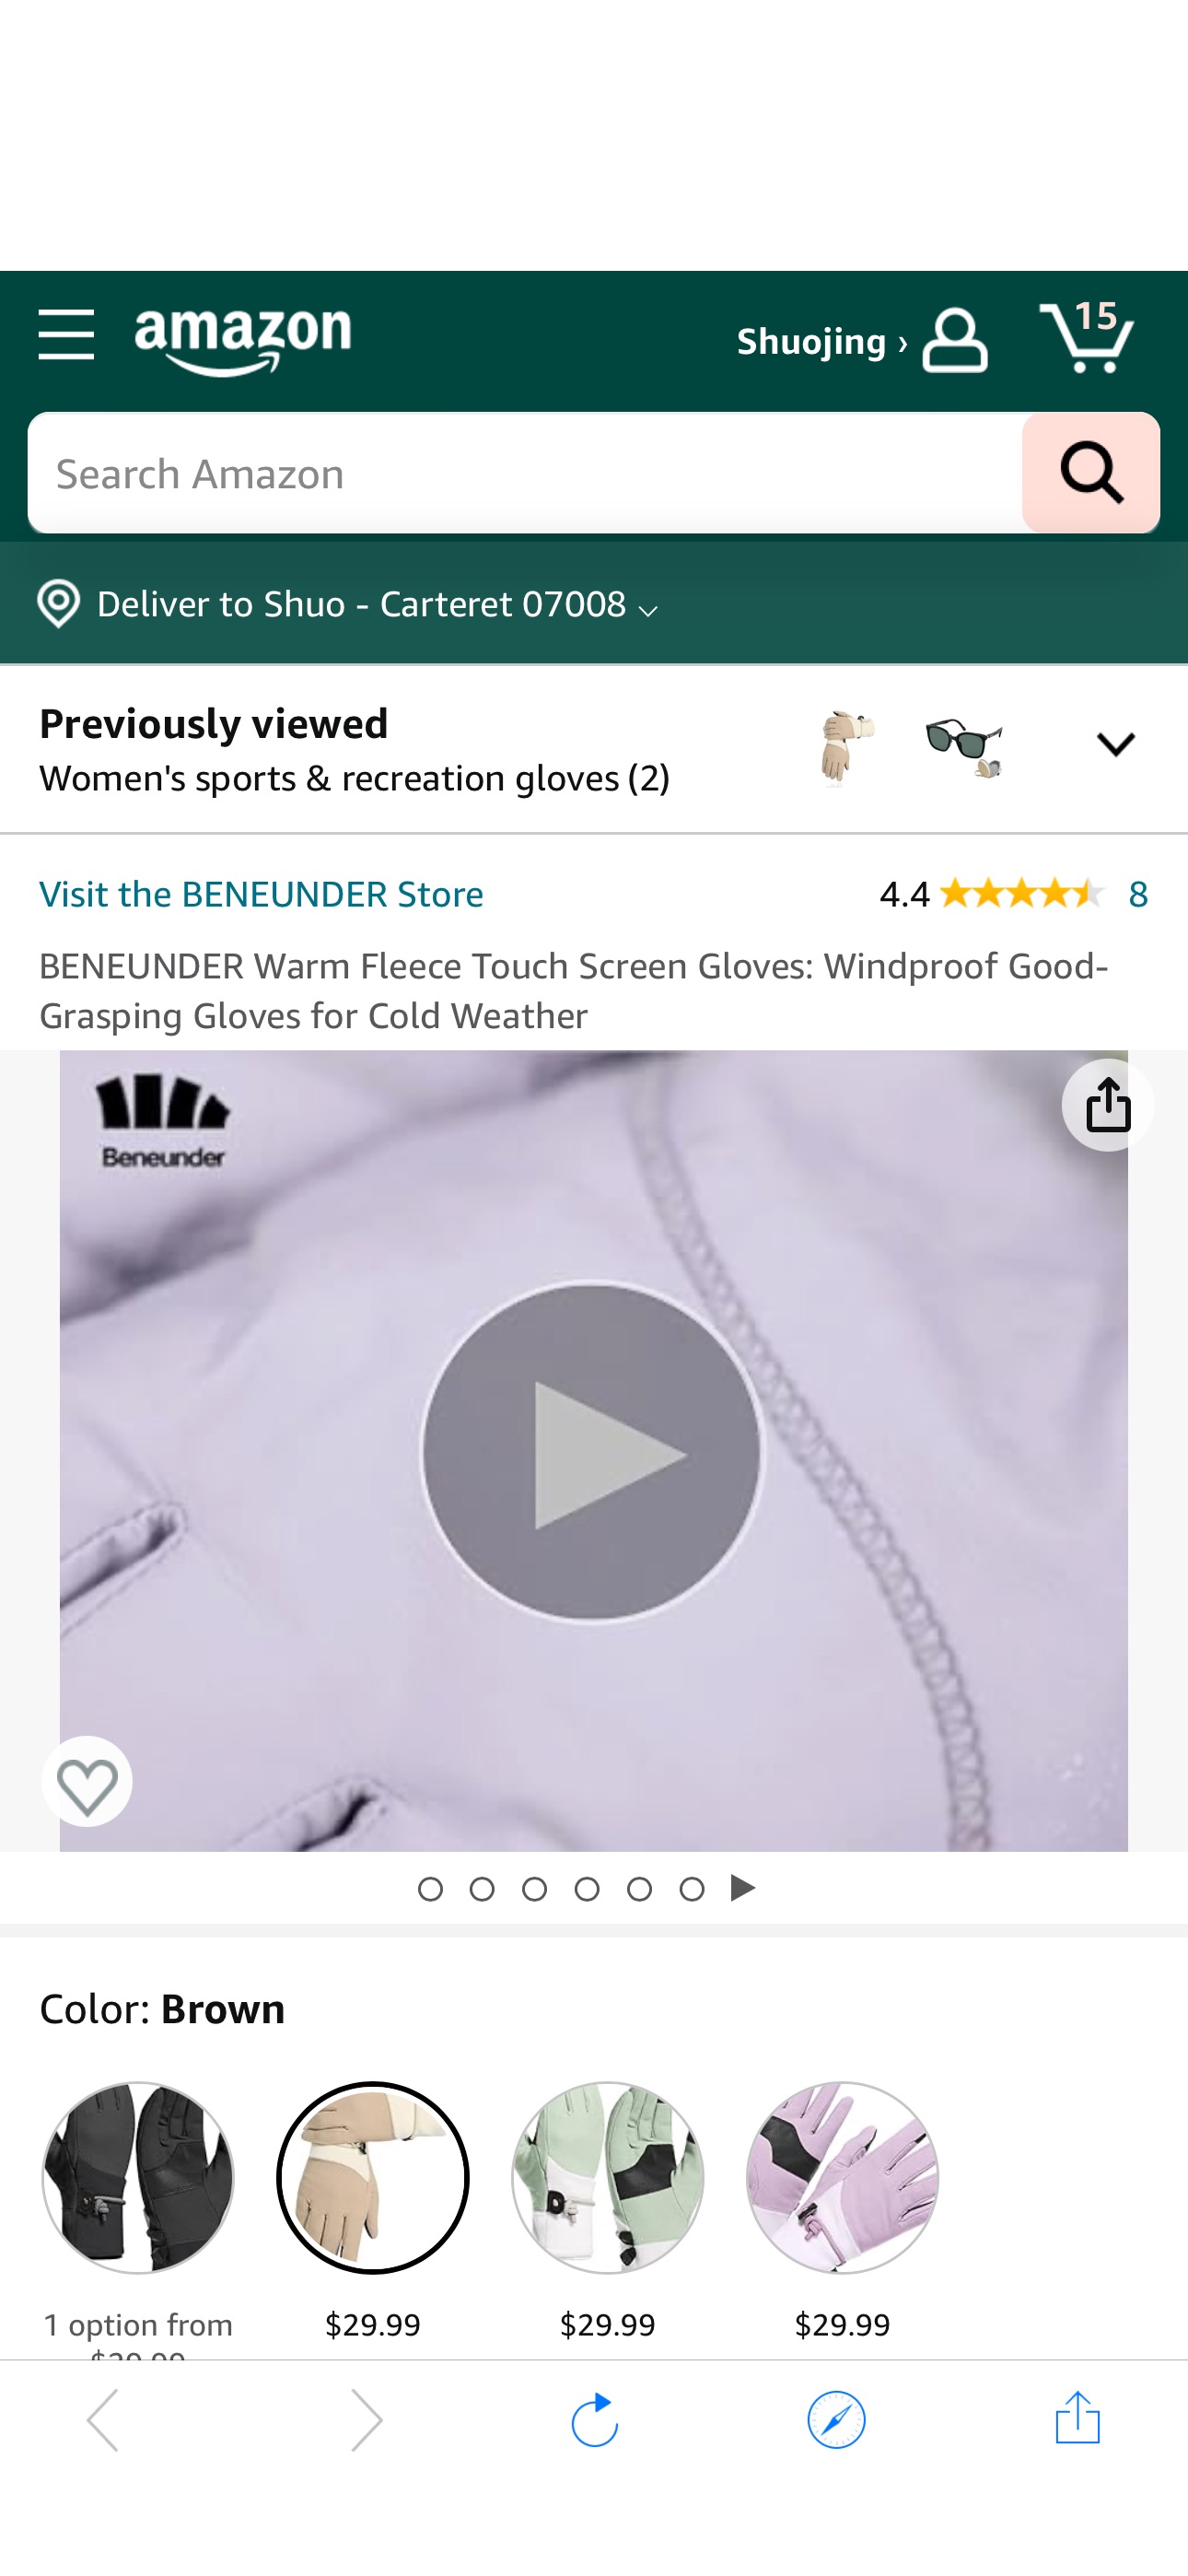 Amazon.com: BENEUNDER Warm Fleece Touch Screen Gloves: Windproof Good-Grasping Gloves for Cold Weather (Brown, Size M) : Clothing, Shoes & Jewelry蕉下手套